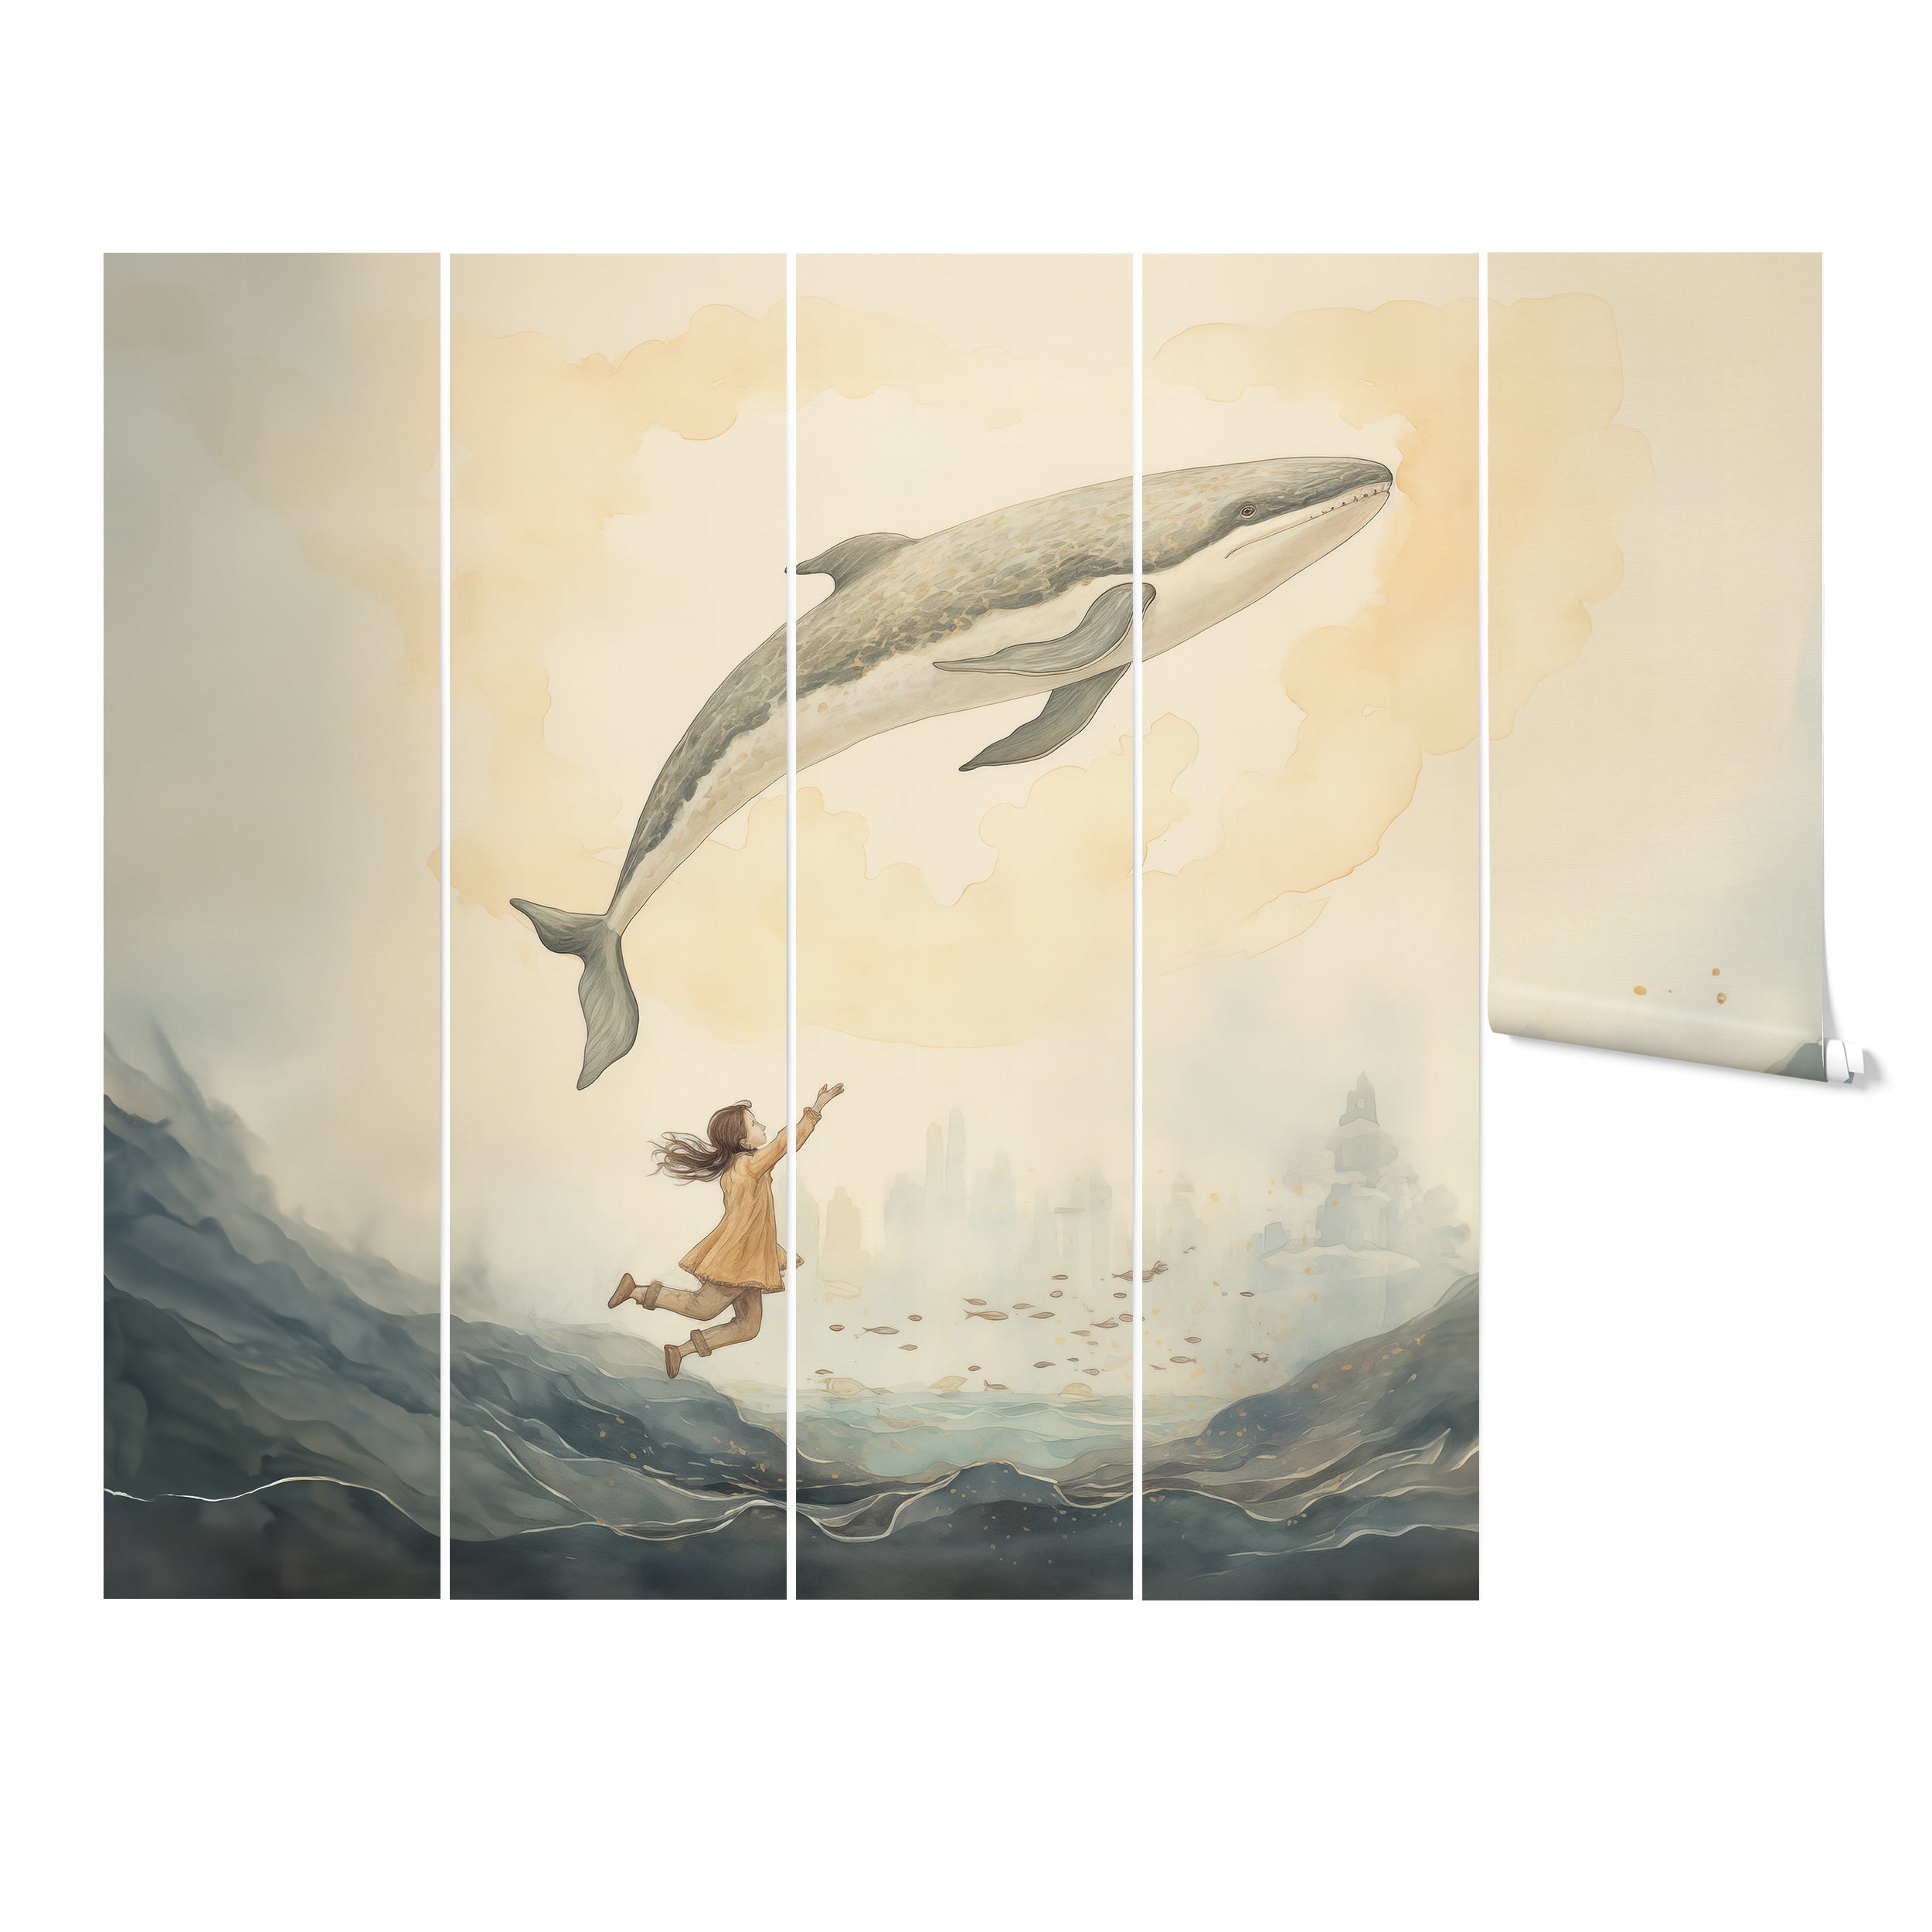 Child reaching out to a flying whale in 'Willie the Whale Mural' depicted on a five-panel children's room wallpaper."